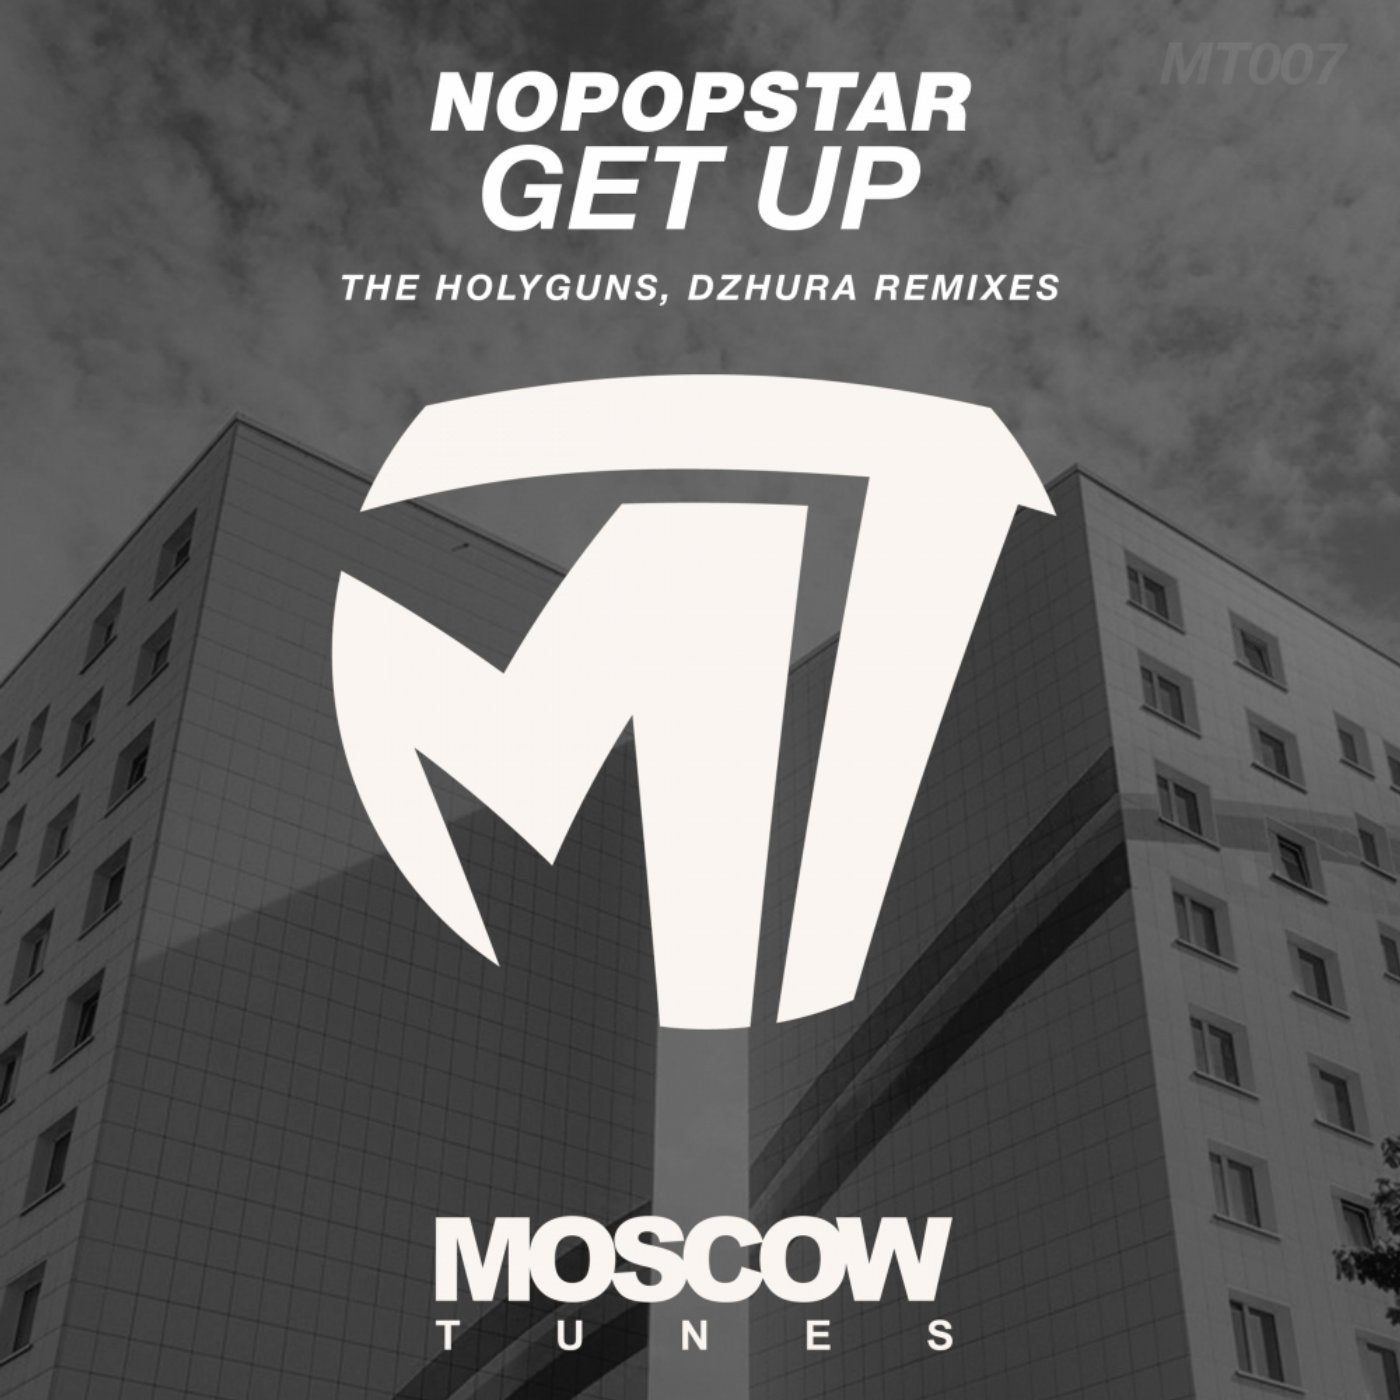 Moscow tunes. Nopopstar. Get up!. Nopopstar, f.a.r moments.